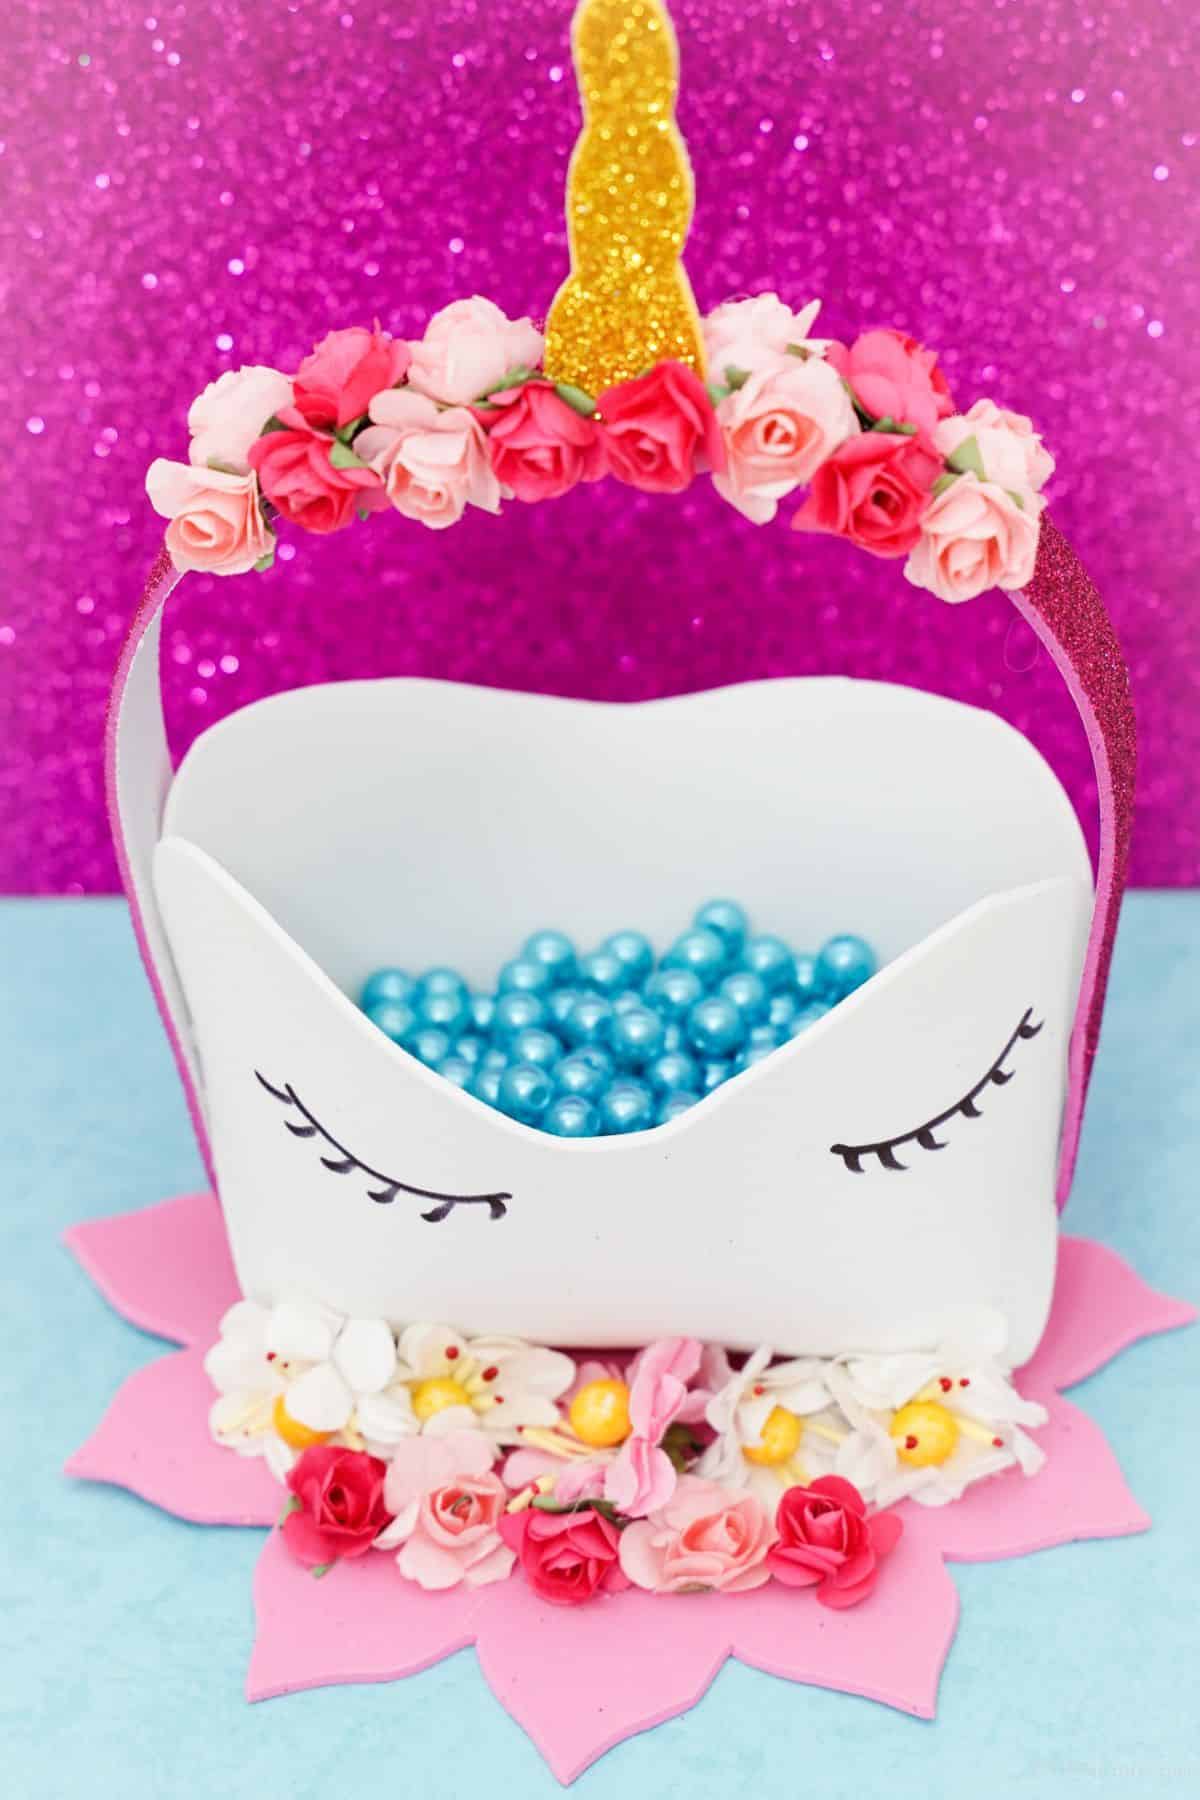 white and pink unicorn basket on blue table with pink glitter background